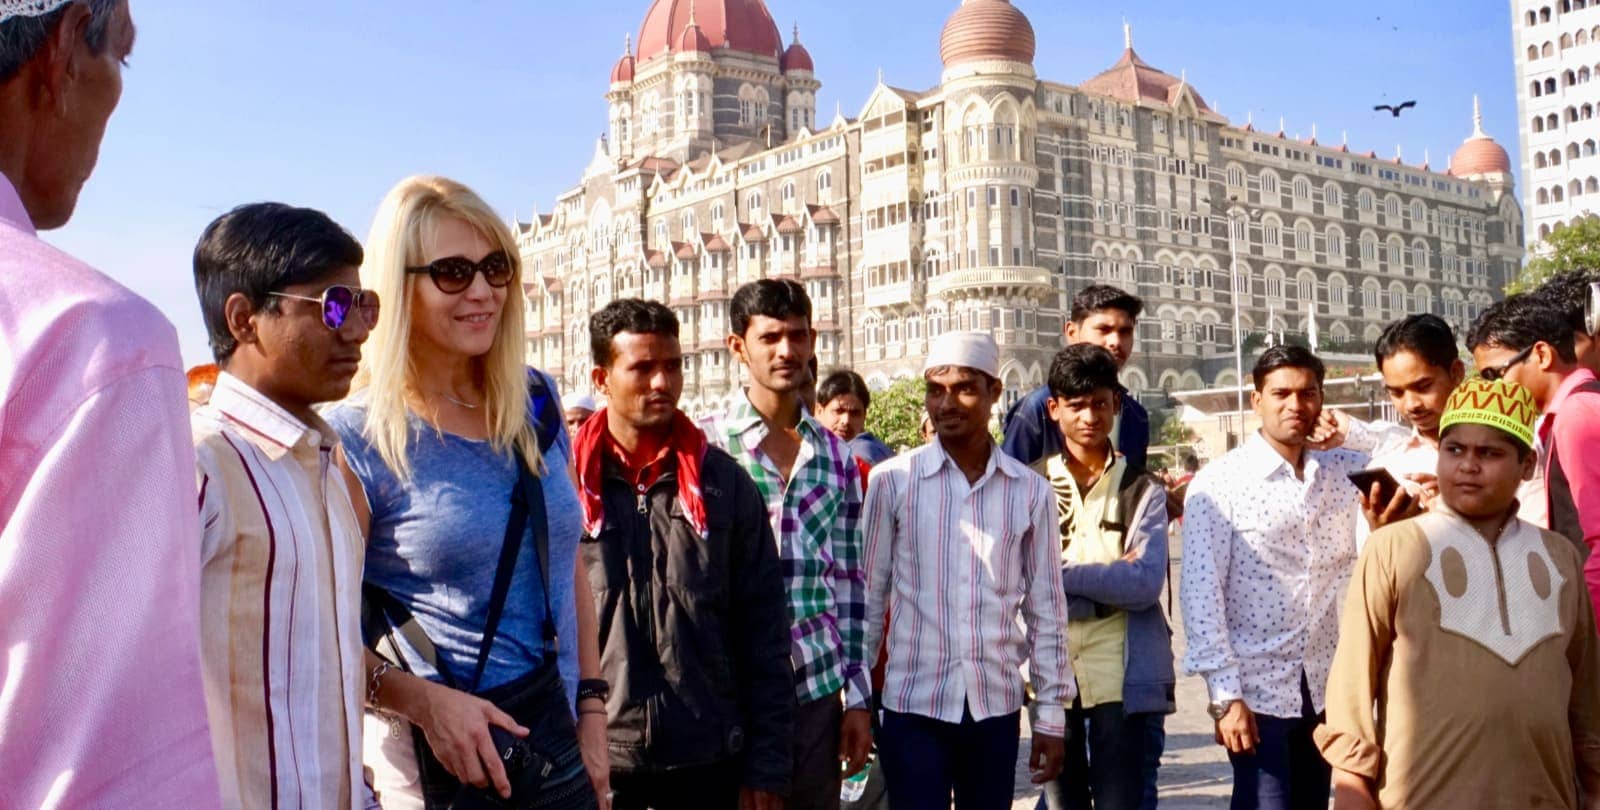 Men and a woman on the streets of Mumbai